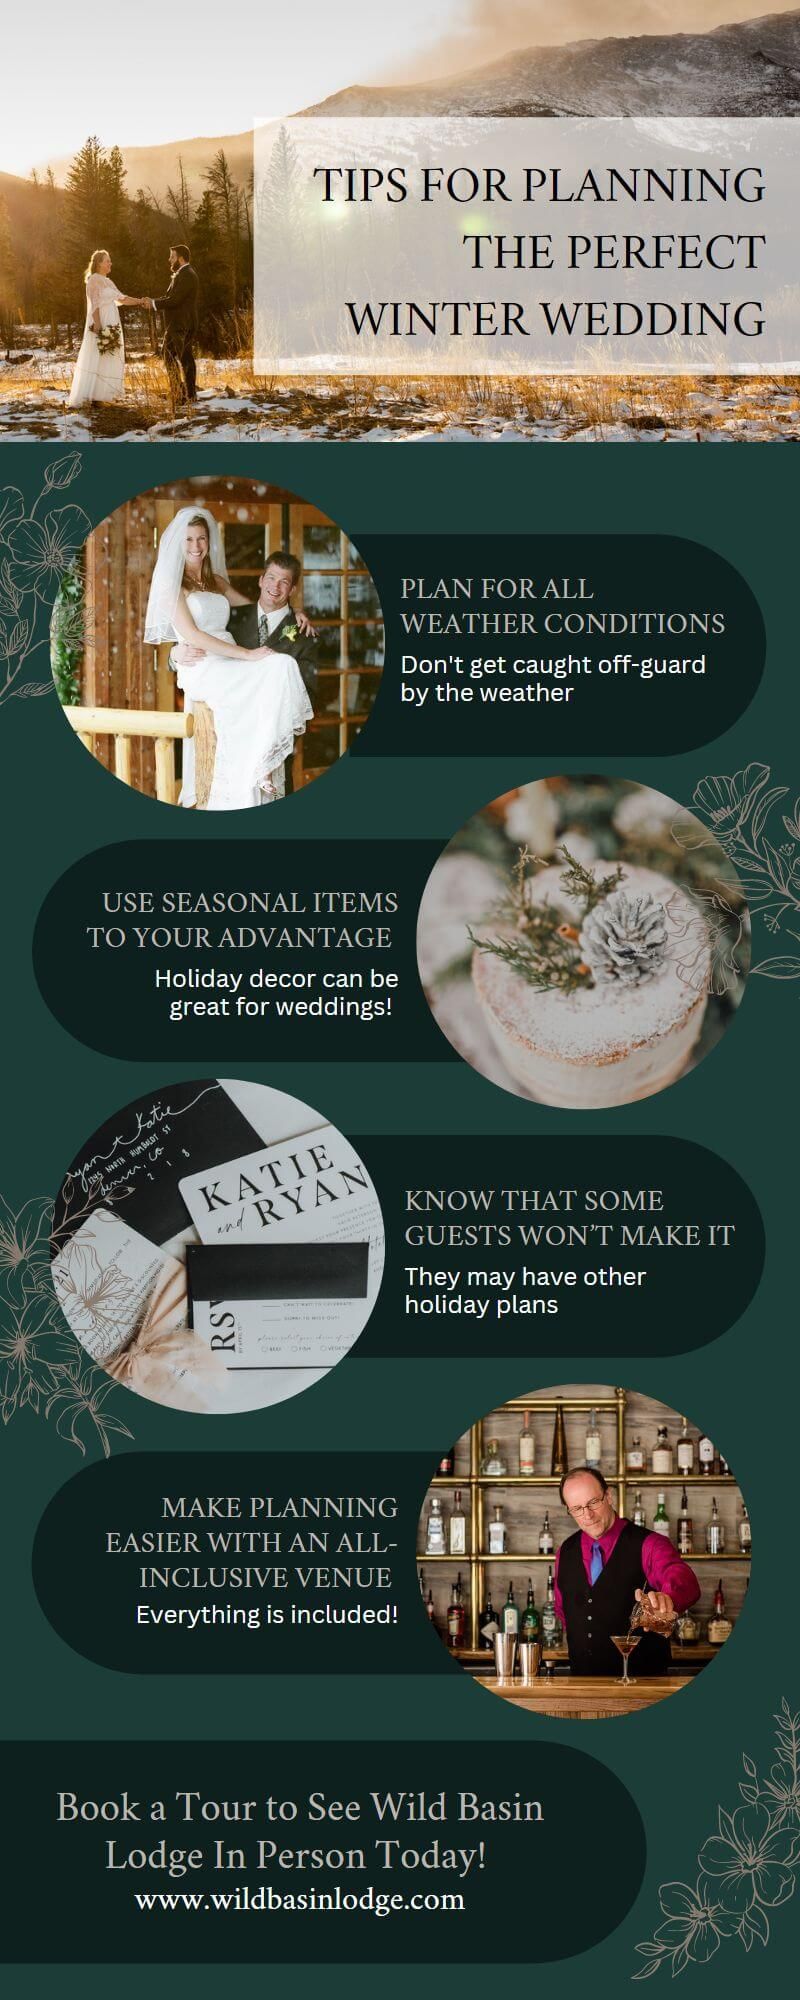 M31704 - Tips For Planning The Perfect Winter Wedding Infographic (1).jpg